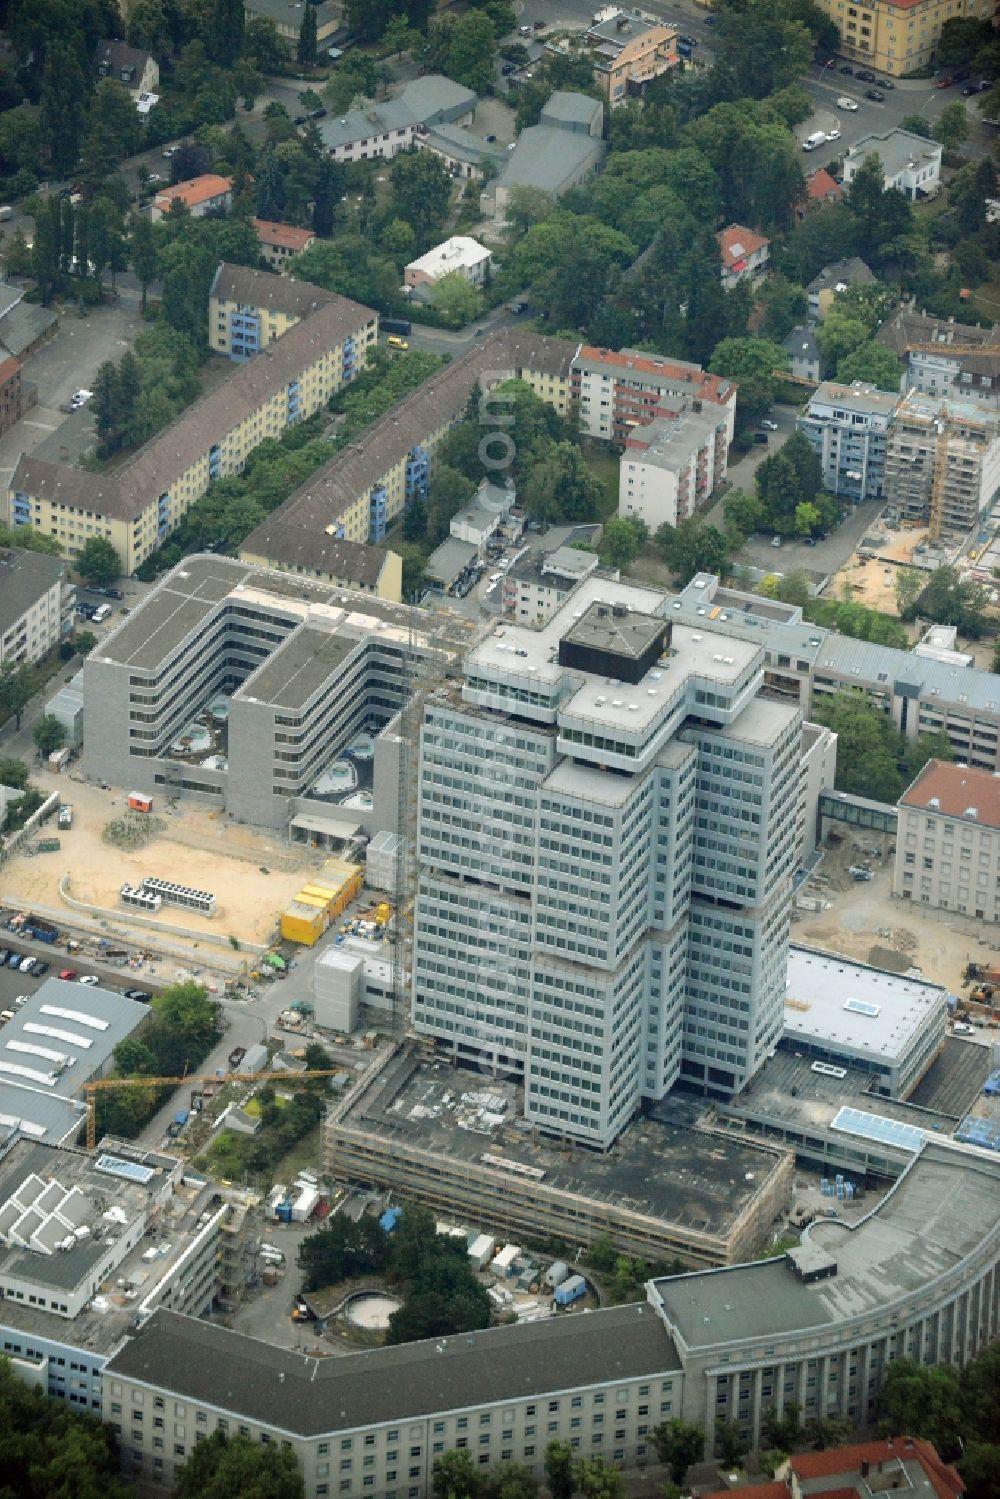 Berlin from the bird's eye view: Office high rise of the Deutsche Rentenversicherung (annuity insurance company) in the Halensee part of the district of Charlottenburg-Wilmersdorf in Berlin in Germany. The office building was built in the 1970s. Construction and renovation works are taking place at the tower on Hohenzollerndamm